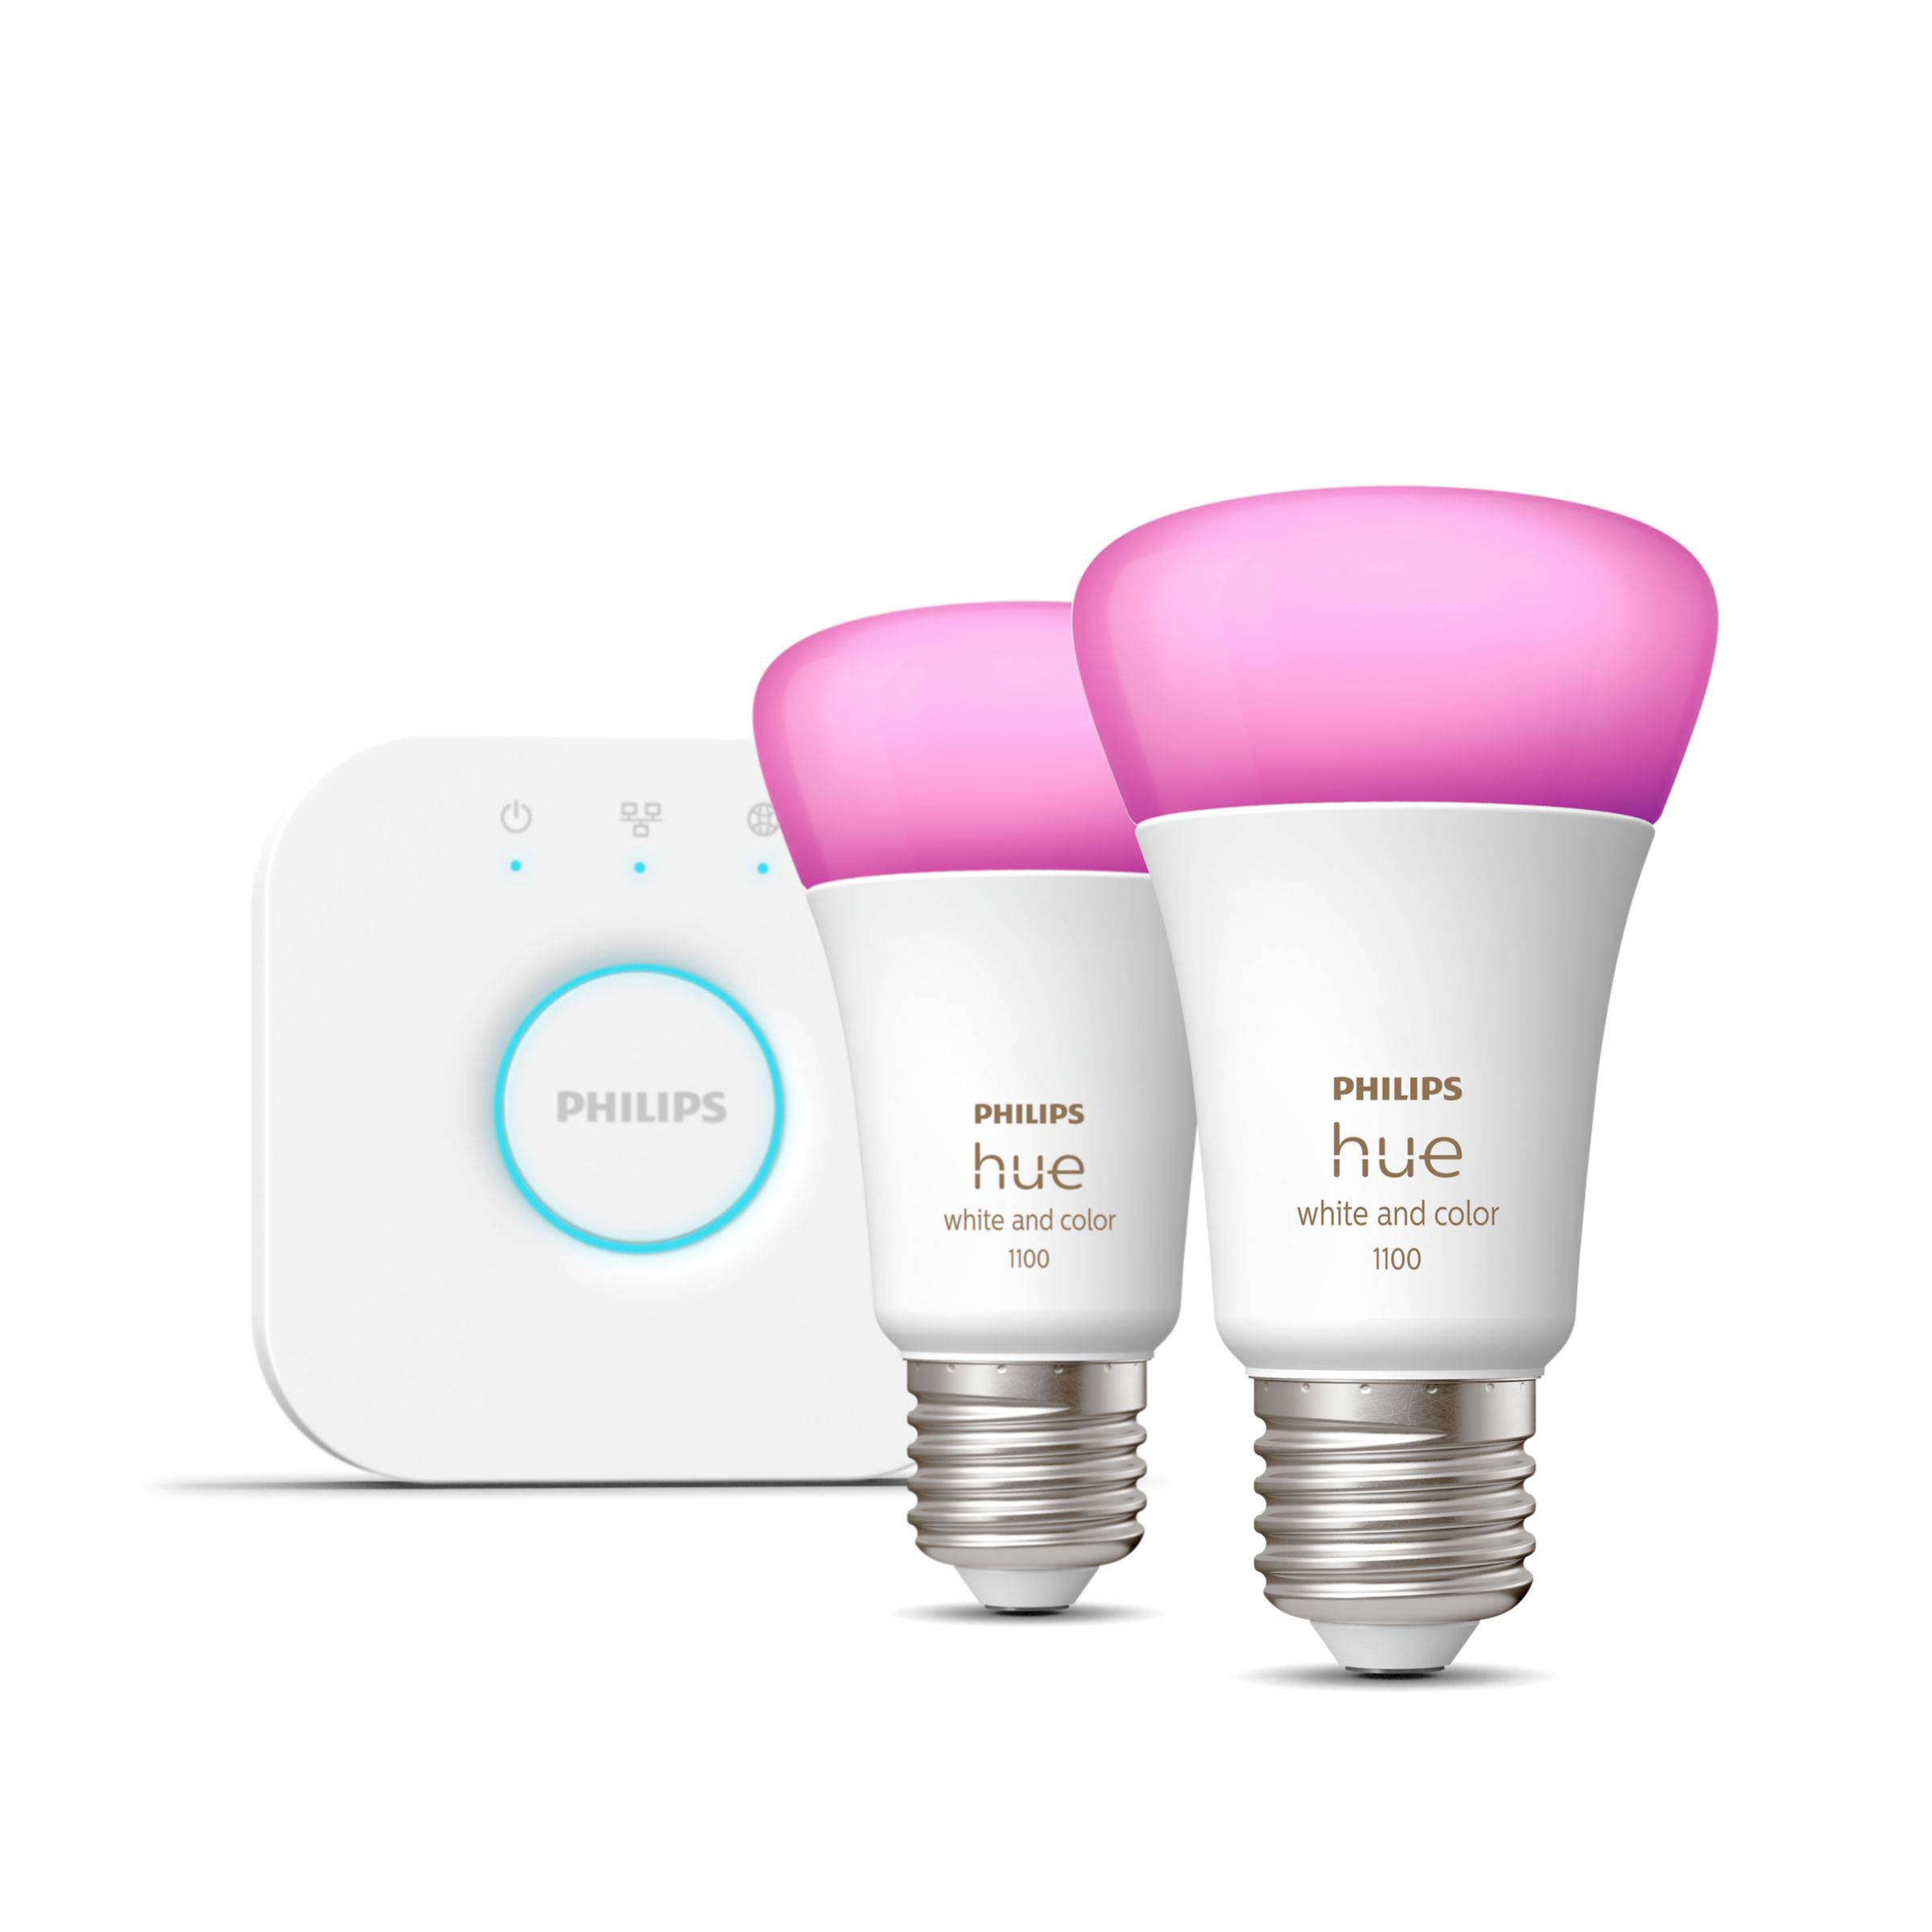 Philips Hue Starter kit E27 - White and color ambiance